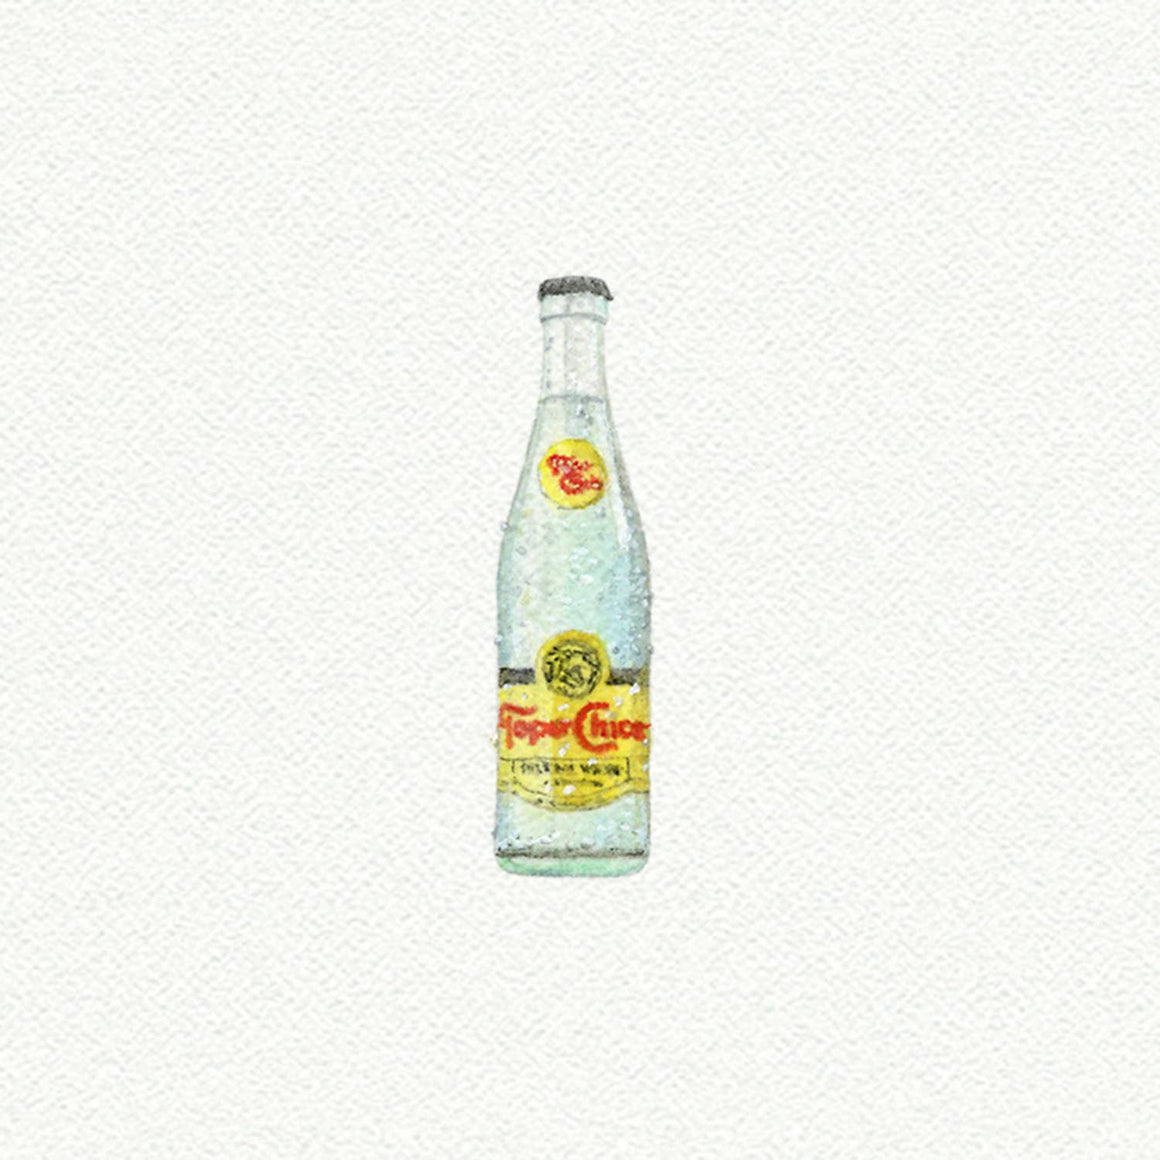 Topo Chico Miniature Watercolor Painting